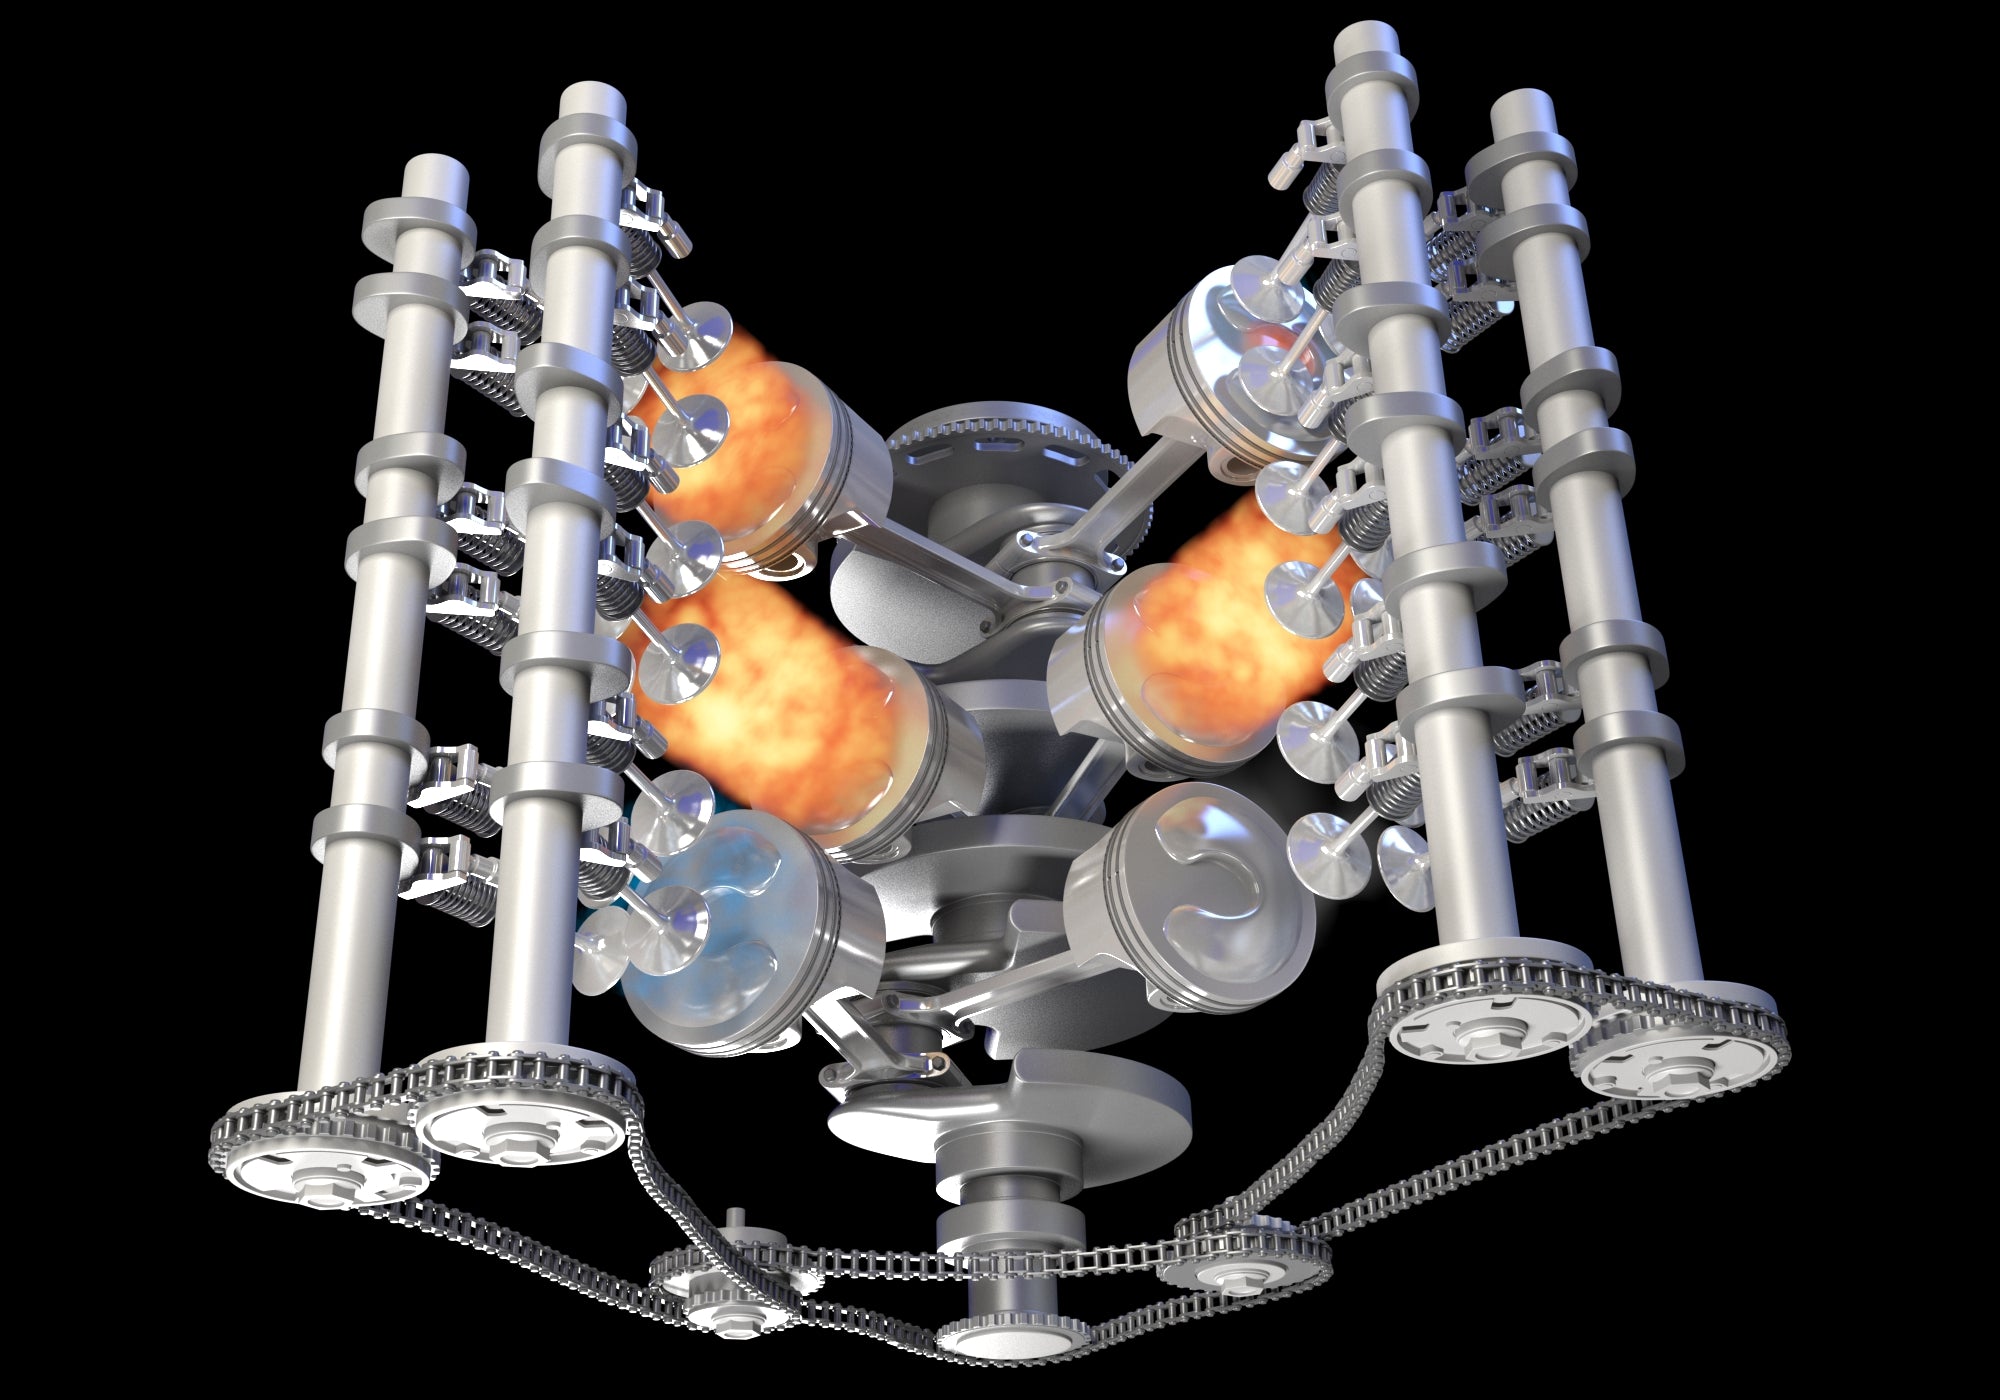 Sectioned V6 Engine with Ignition - 3D Model by 3D Horse